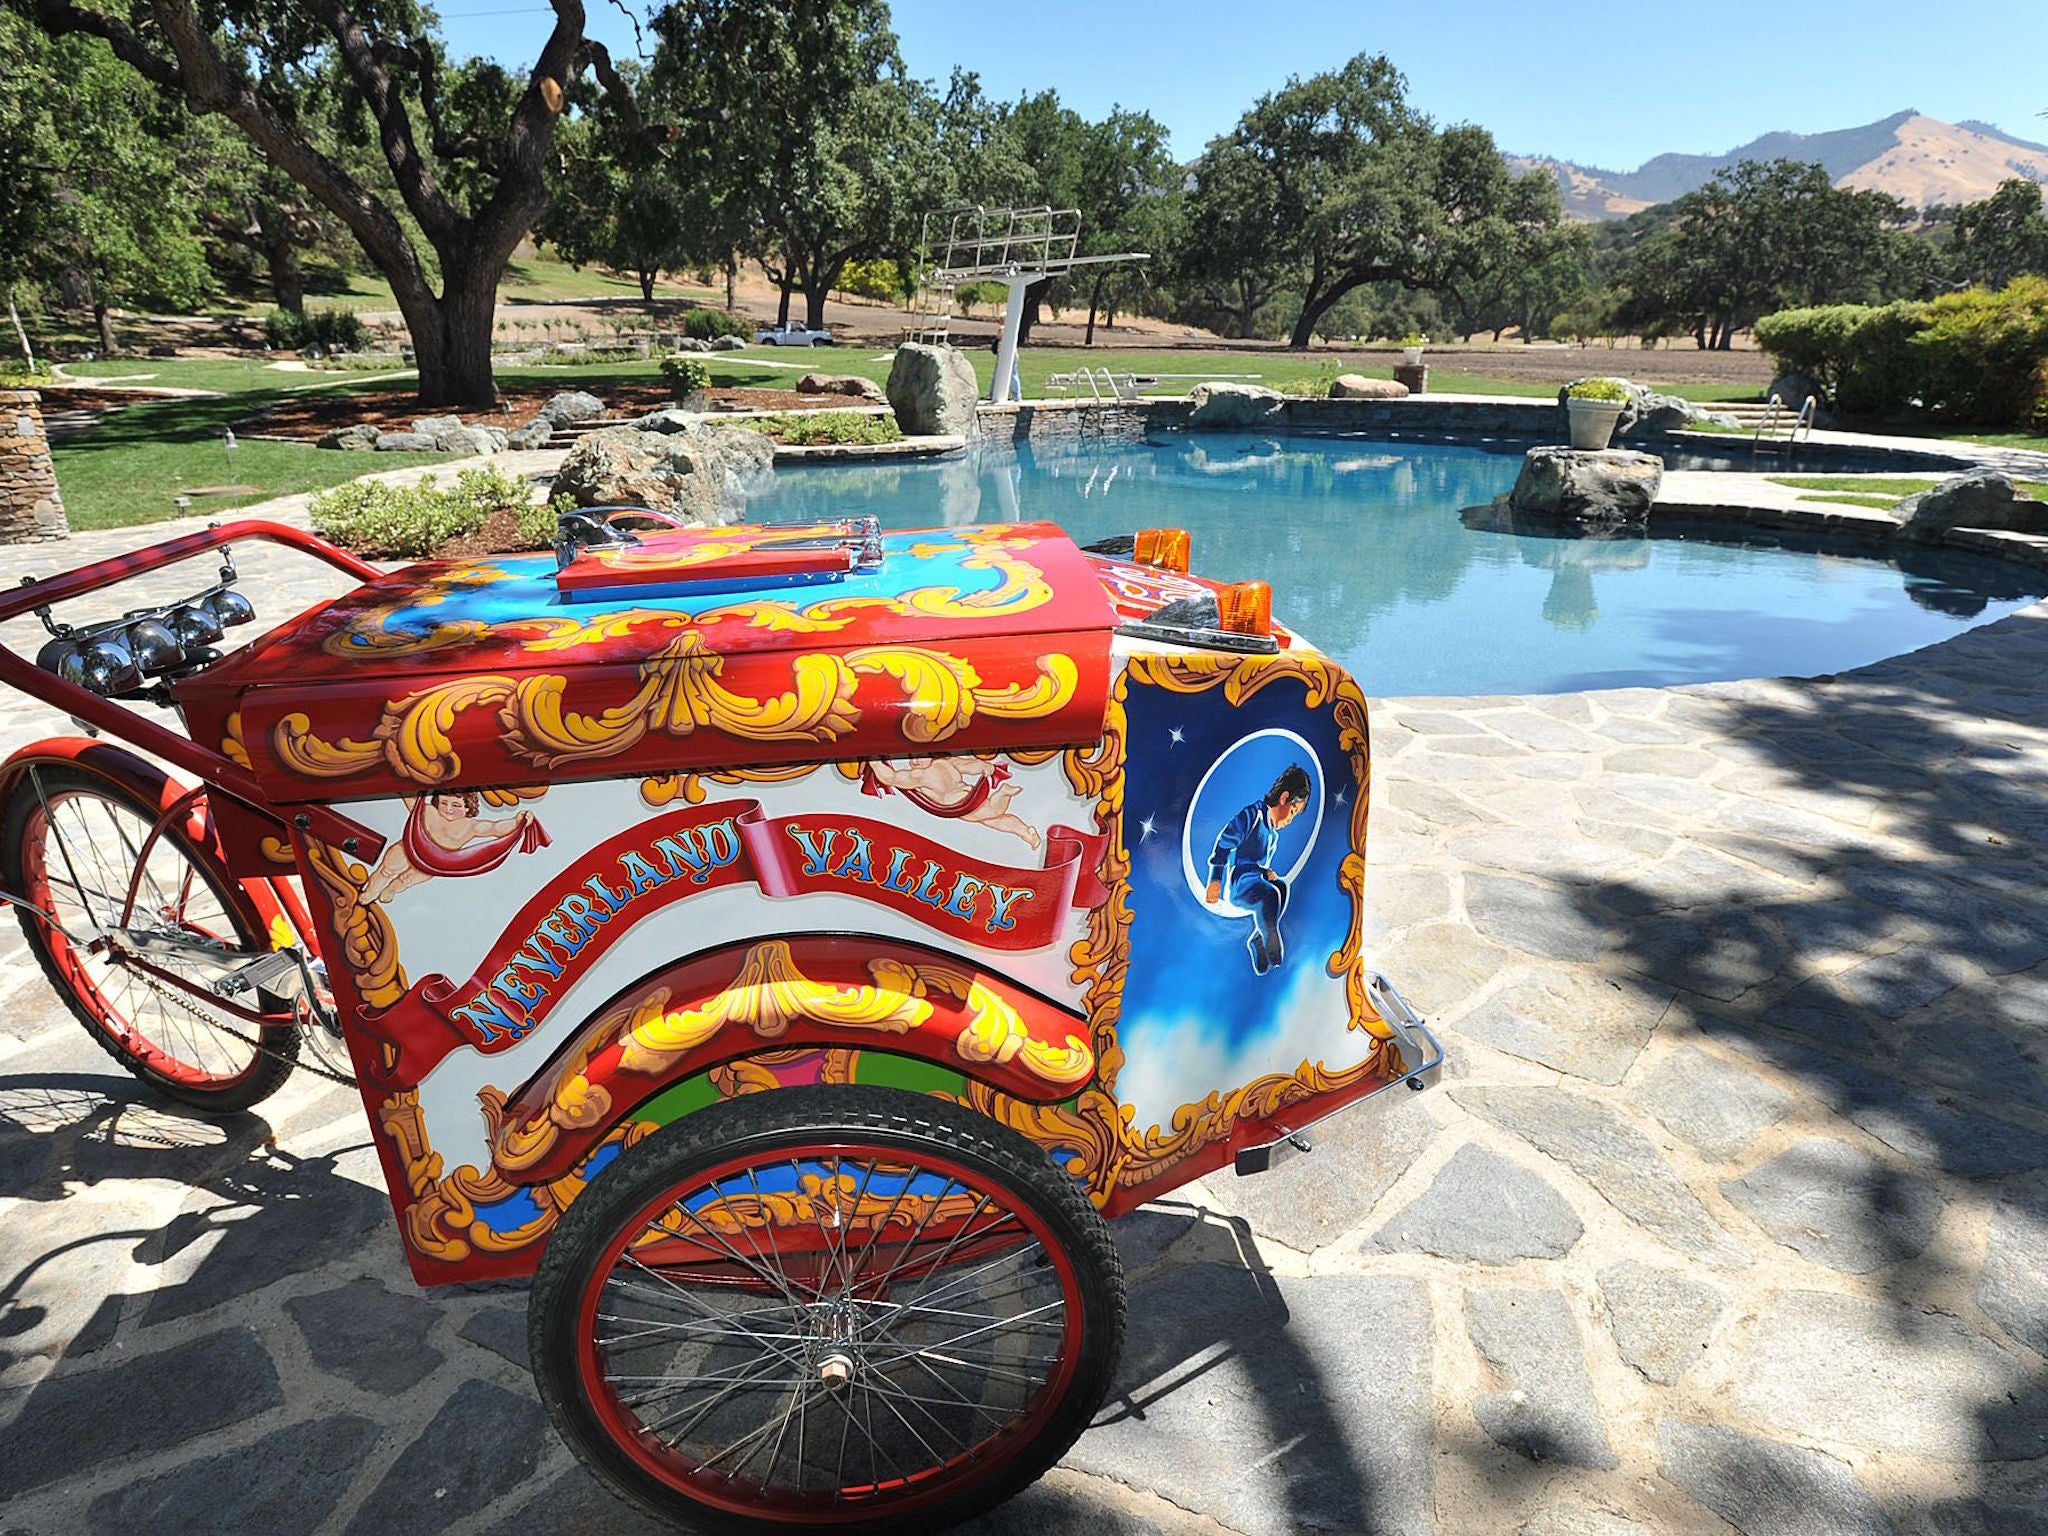 A vintage ice-cream bike gifted to Jackson by Elizabeth Taylor